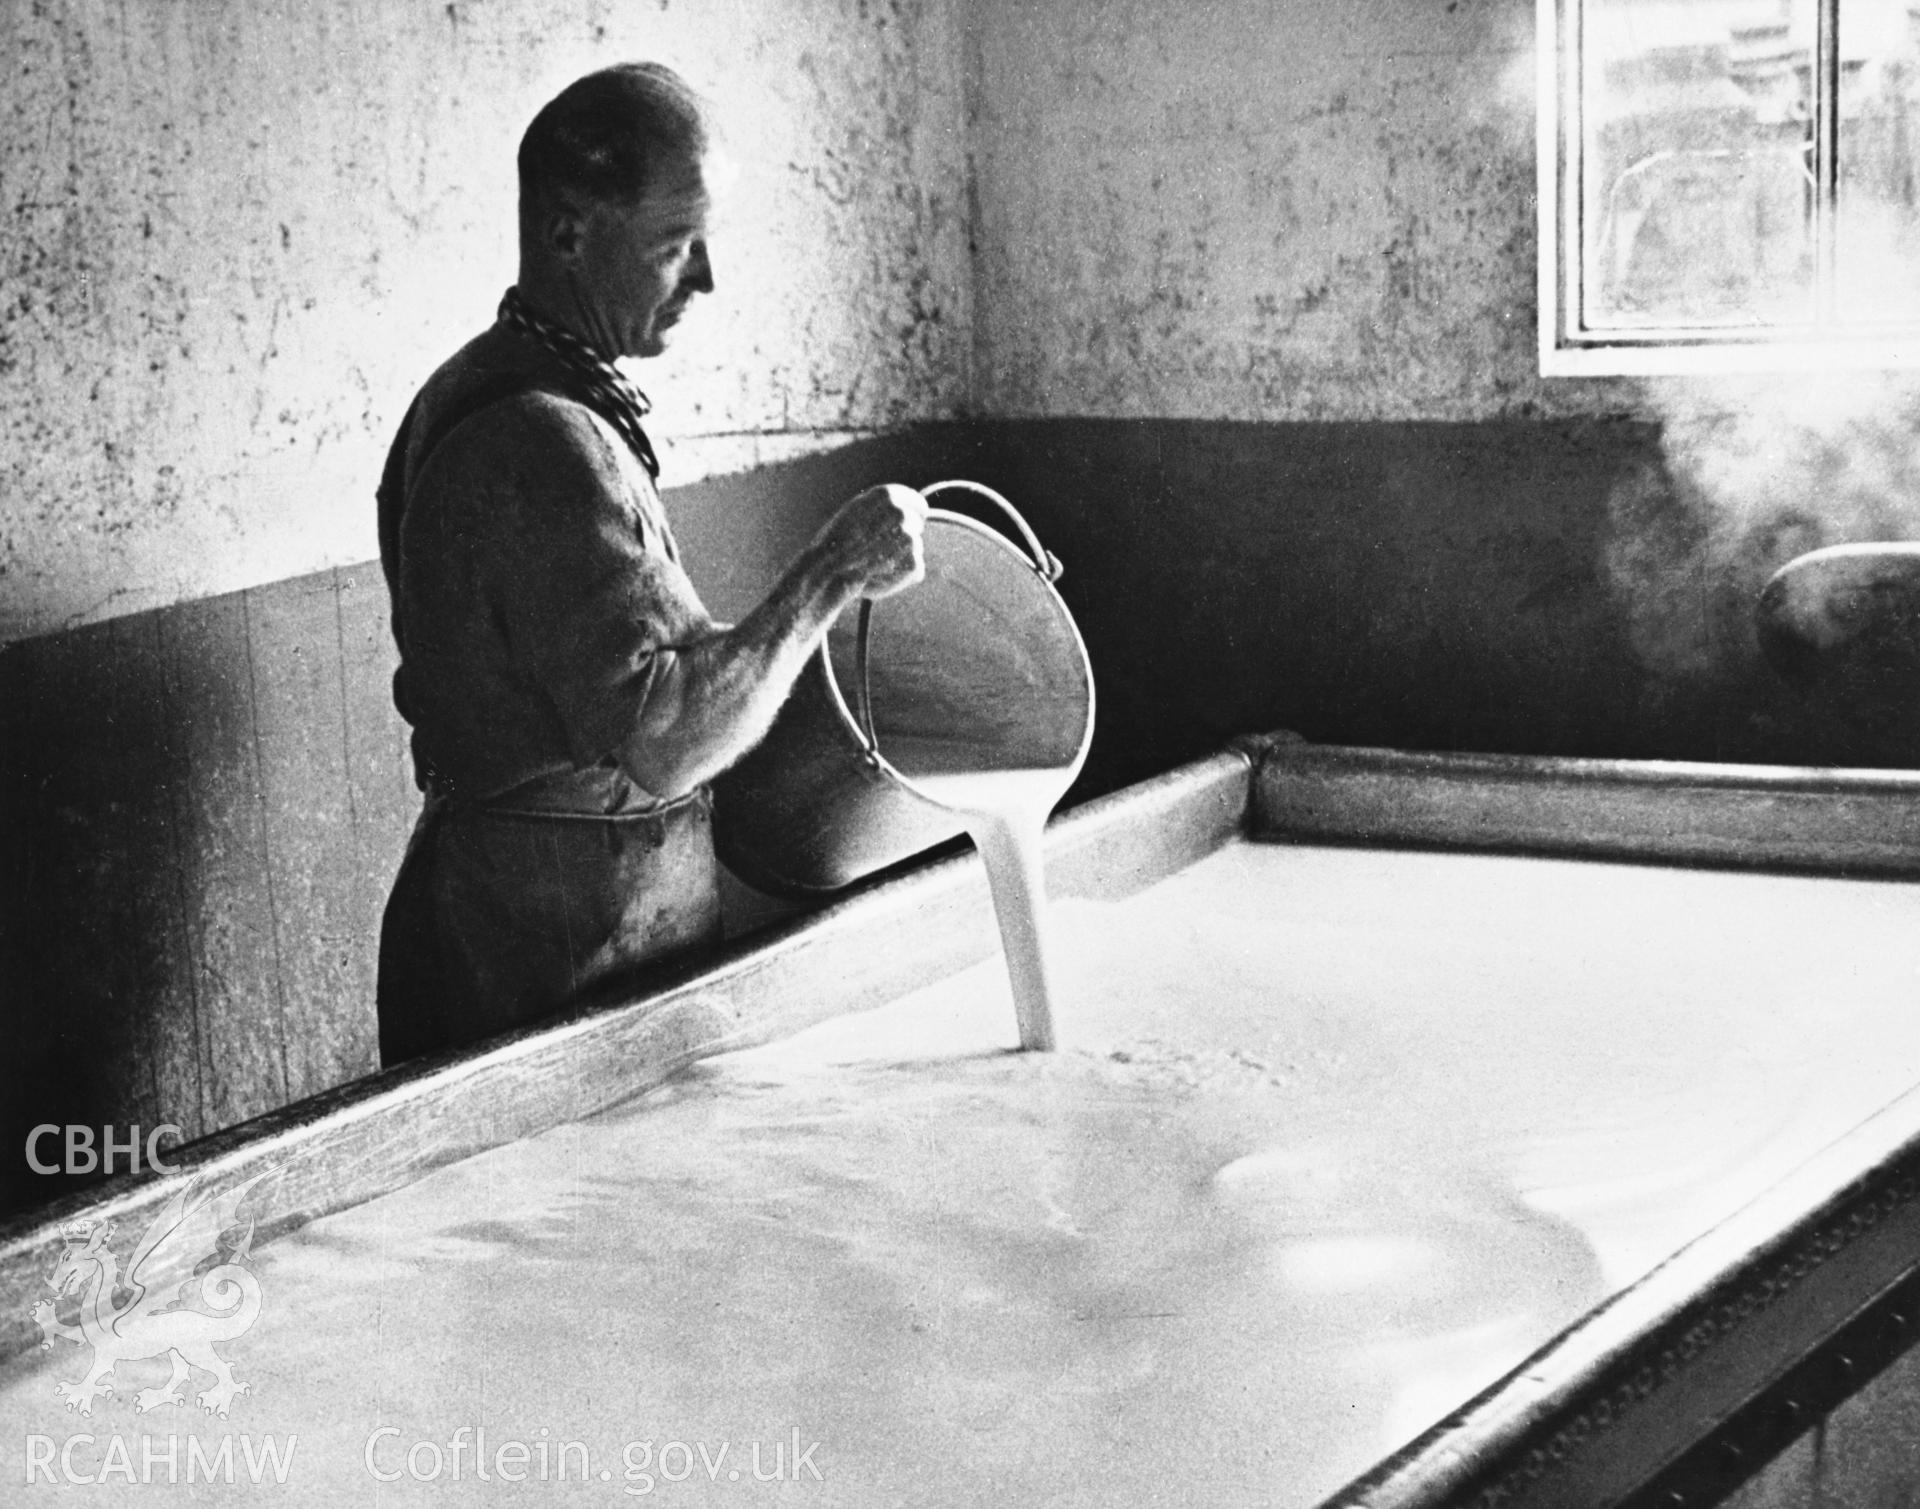 Copy of a pre-1950 photo showing addition of starter culture to pasteurised milk.